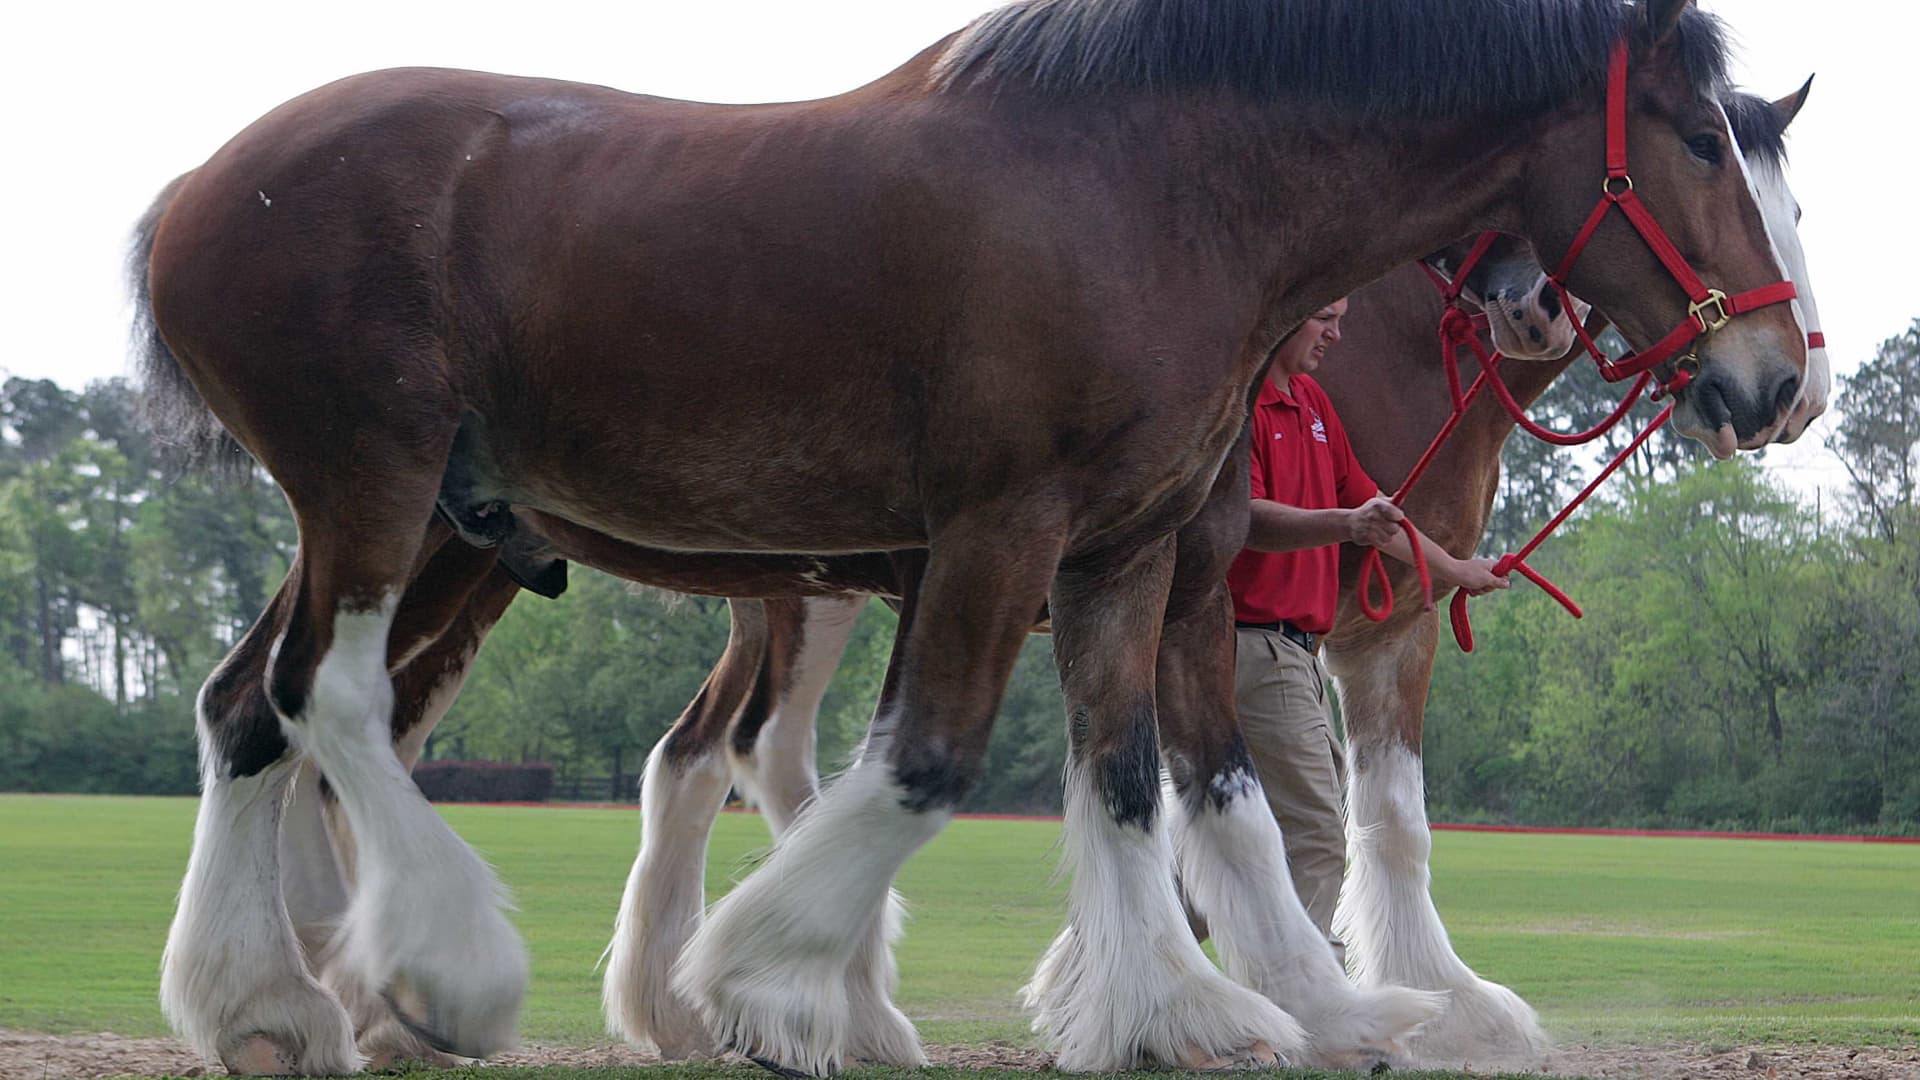 Anheuser-Busch to stop cutting off Clydesdale horse tails after backlash